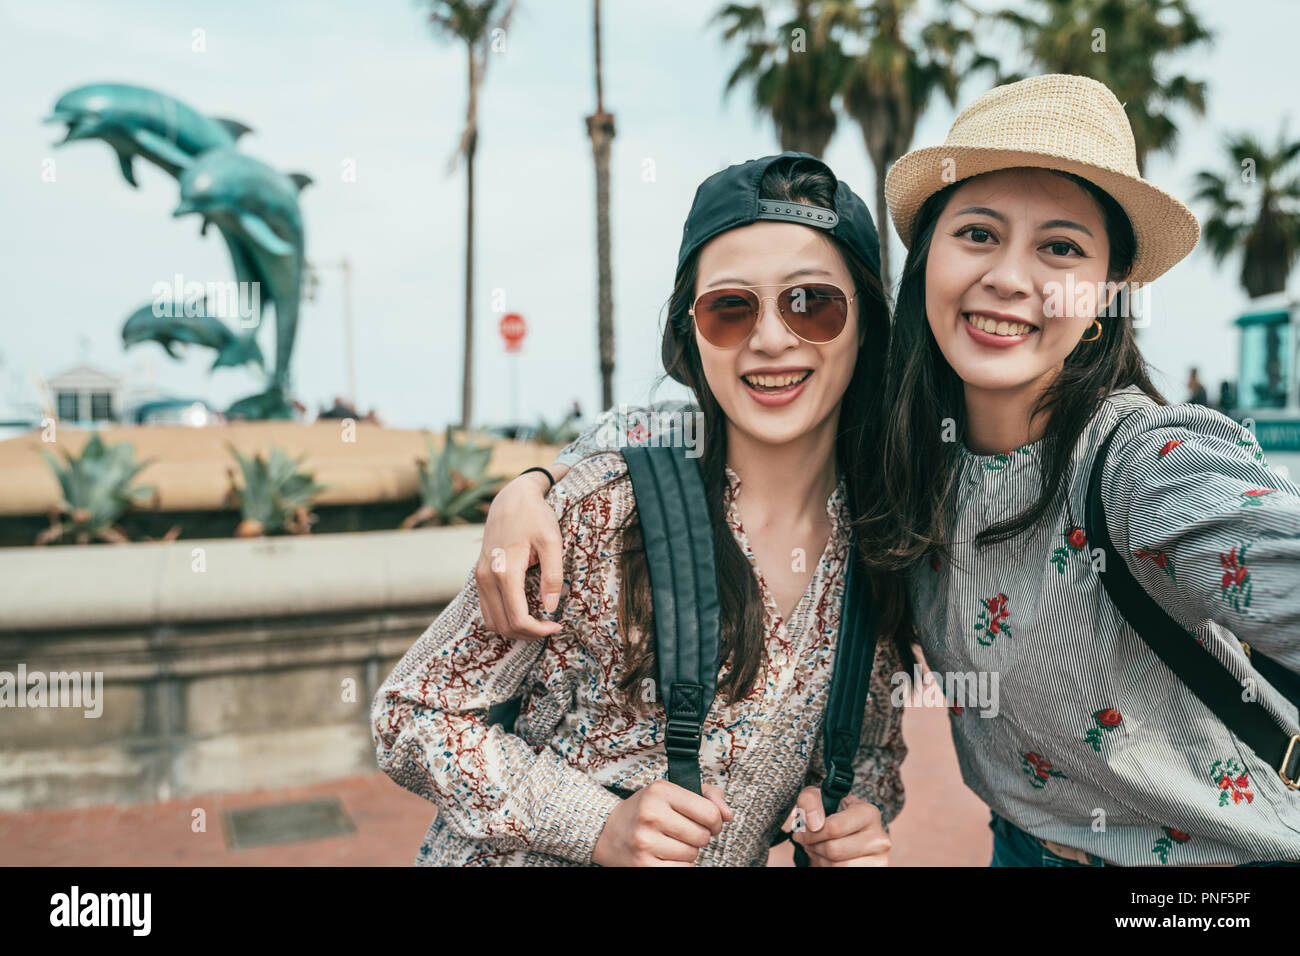 two women smiling and taking selfies happily in front of a dolphin fountain in a lovely plaza. Stock Photo